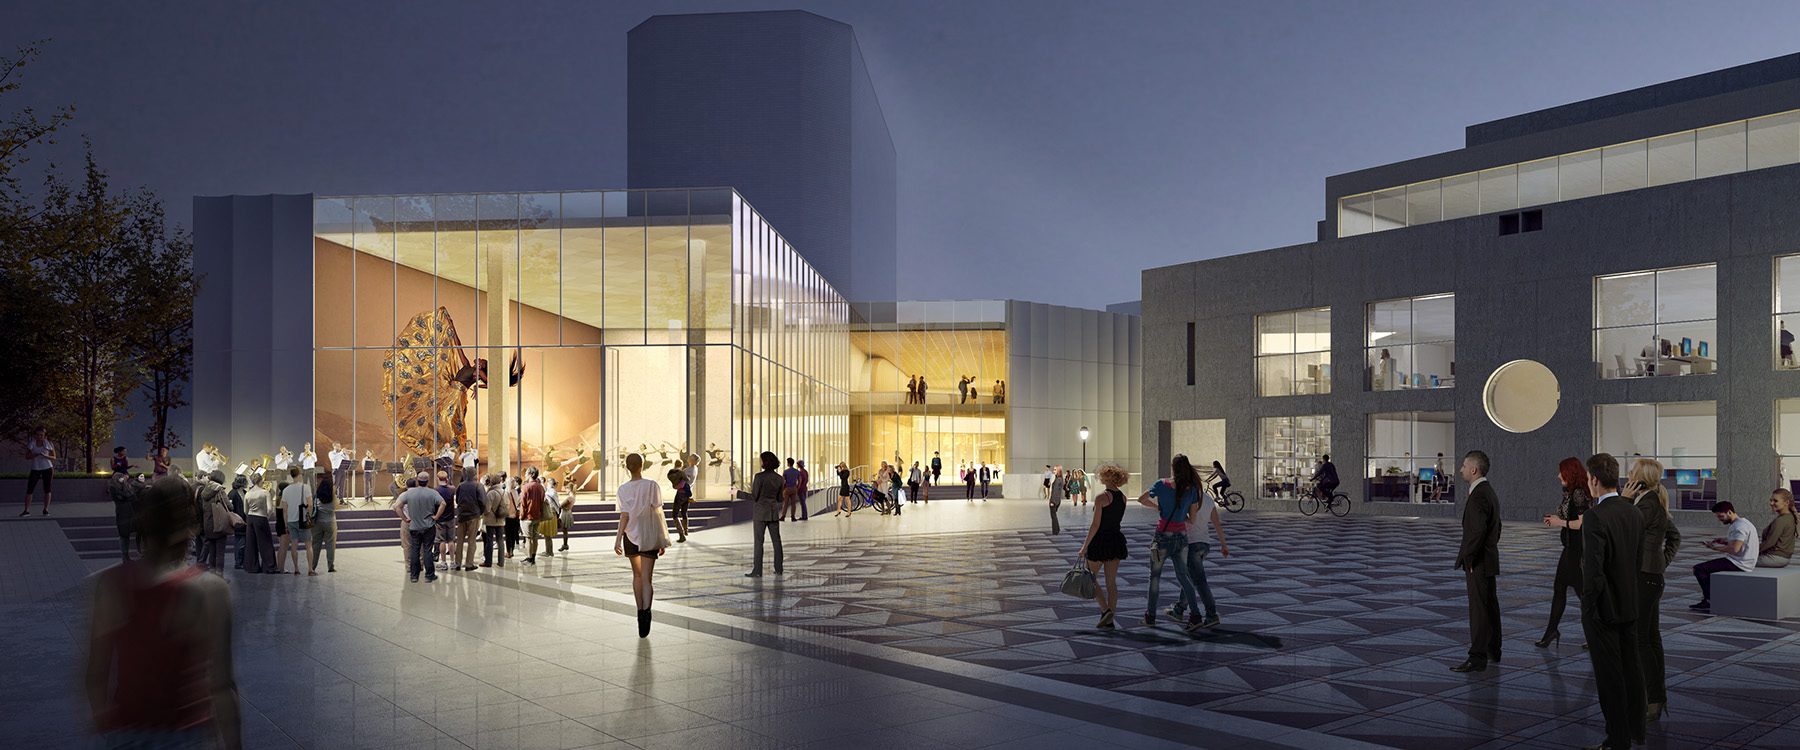 Design rendering of the Annenberg Center plaza at night time